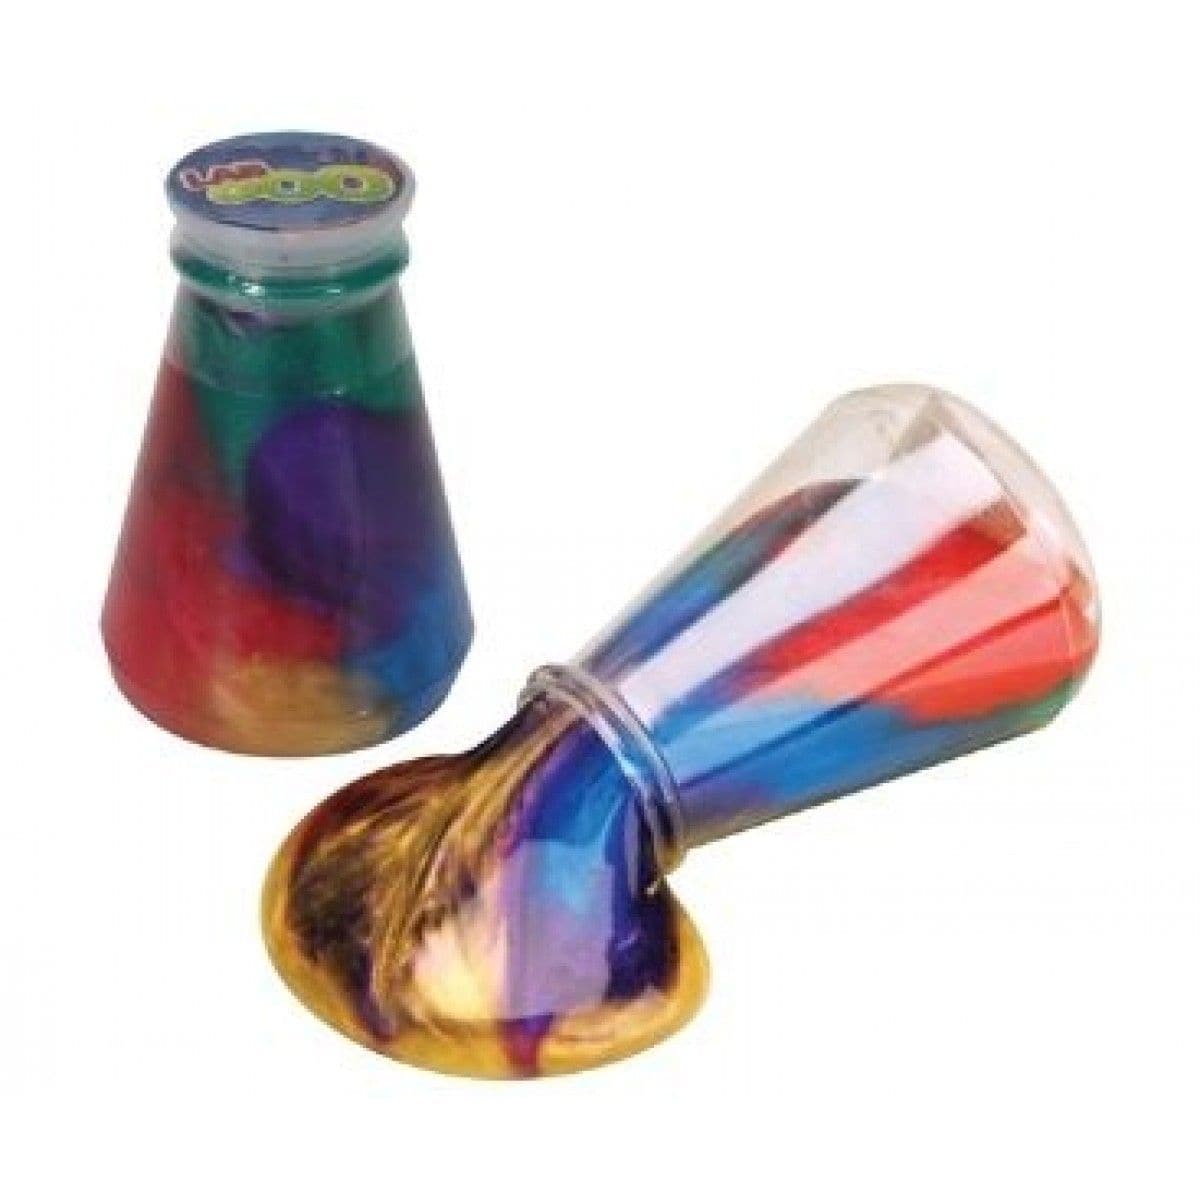 Labgoo Rainbow Slime, This flask of Labgoo Rainbow Slime is filled with all the colours of the rainbow! Great for sensory play any time of the year and perfect for parents who do not want the mess of making slime in their kitchen! This amazing metallic Labgoo slime is multicoloured and comes in a little conical flask. Plus it looks super cool with its swirly vibrant colors and a hint of cosmic shimmer. For a trip to the outer reaches of stress relief fun, get some out-of-this-world space putty today. Colour